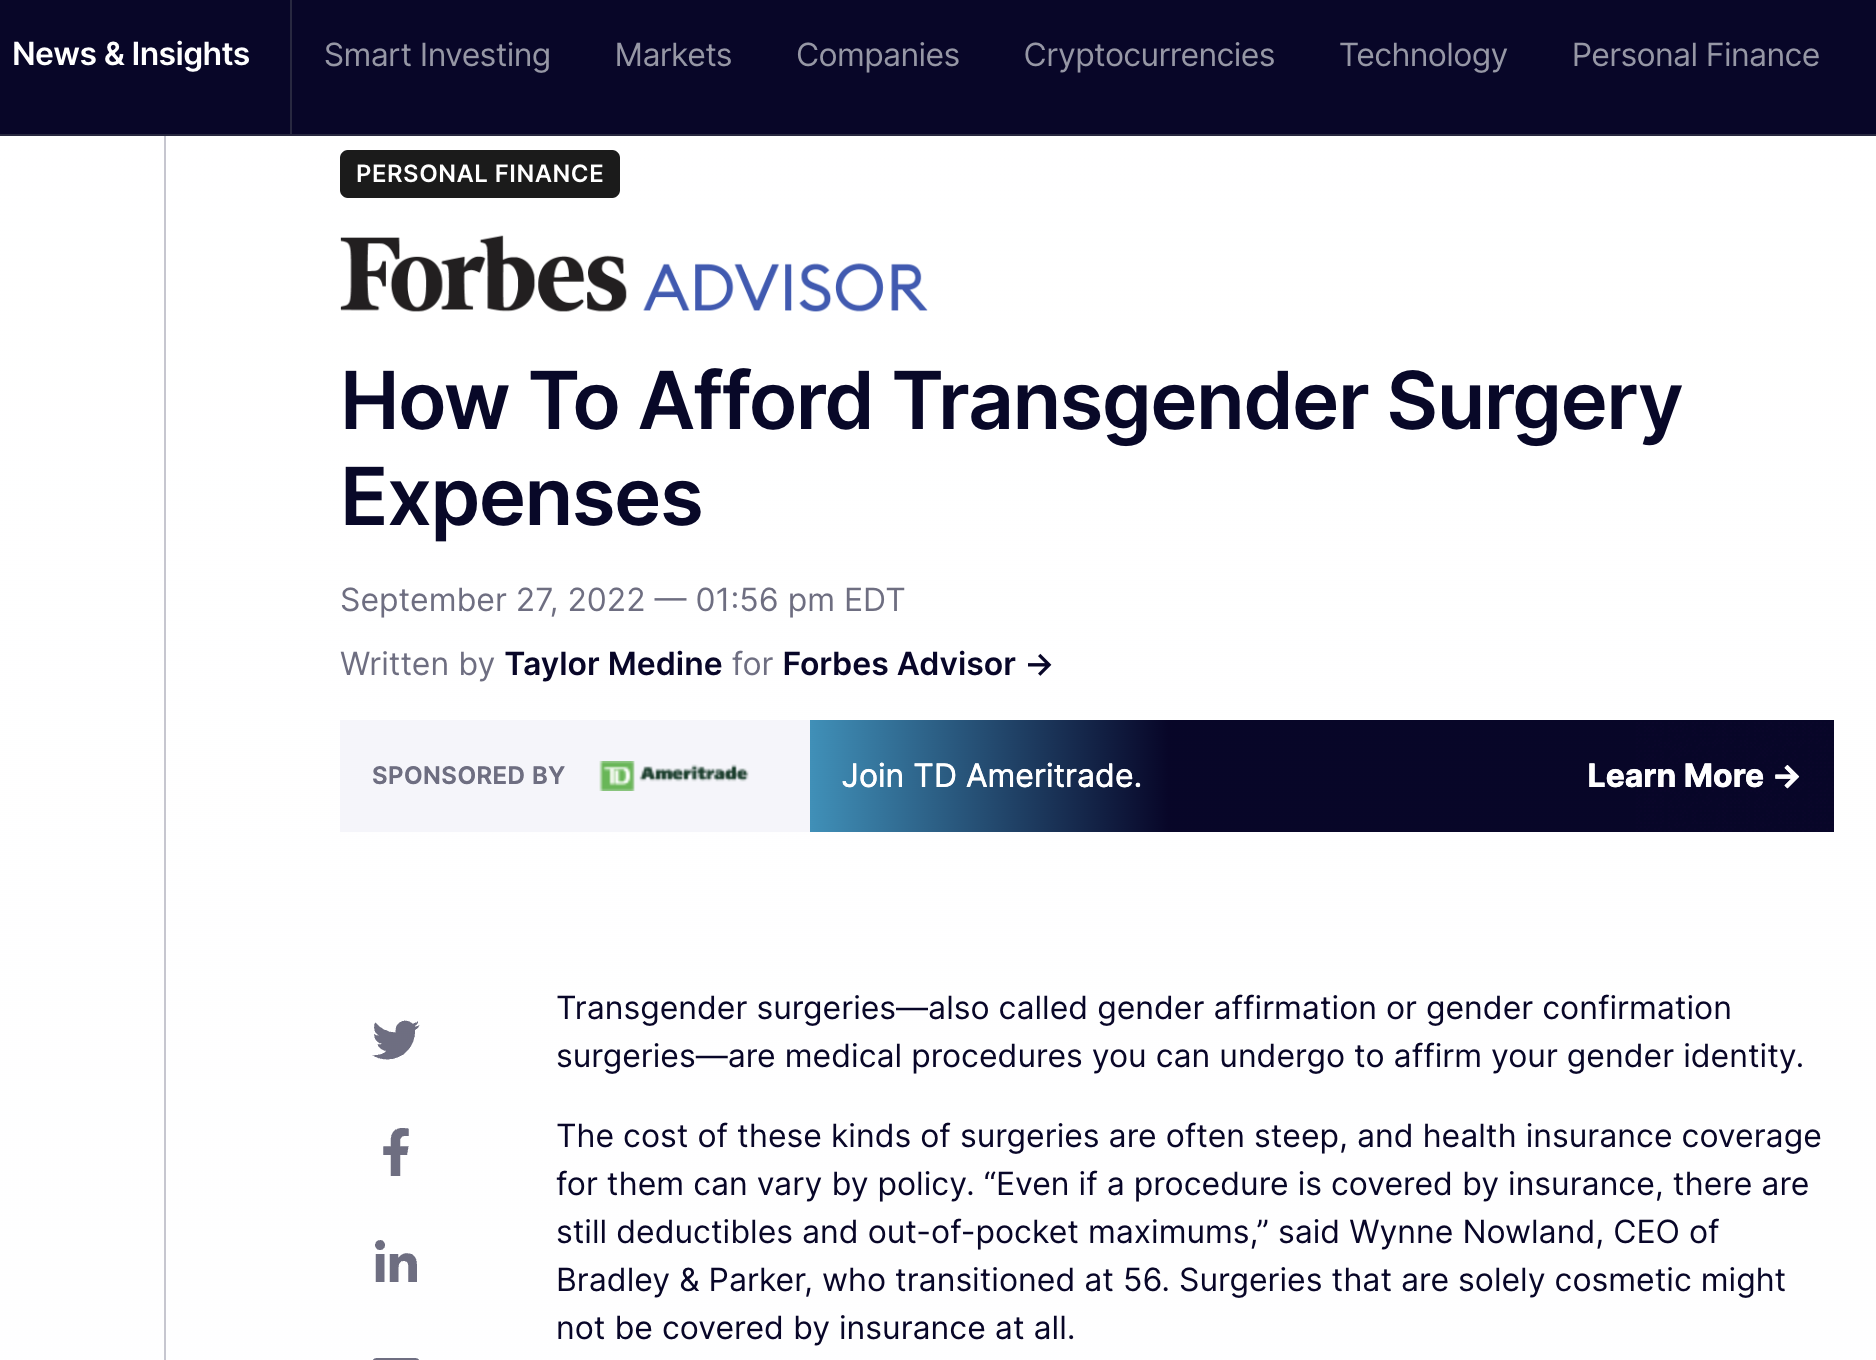 how-to-afford-transgender-surgery-expenses